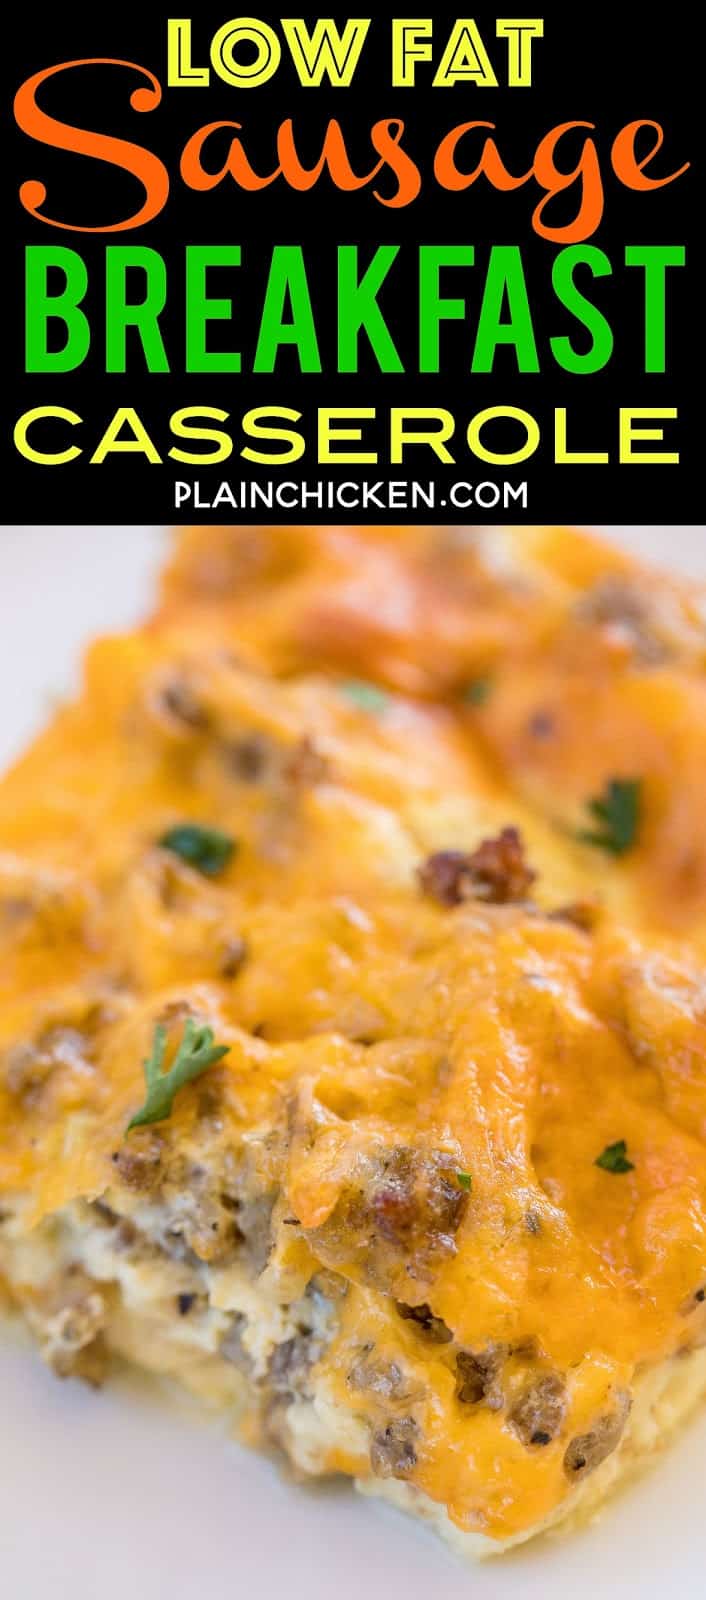 Low Fat Sausage Breakfast Casserole - nobody will ever know this is low-fat! Tastes AMAZING!!! Great make ahead breakfast casserole. Turkey sausage, low-fat cheese, egg beaters, egg, milk and wheat bread. Easy swaps that lower the fat but keep all the flavor. SO good!! #lowfat #breakfast #casserole